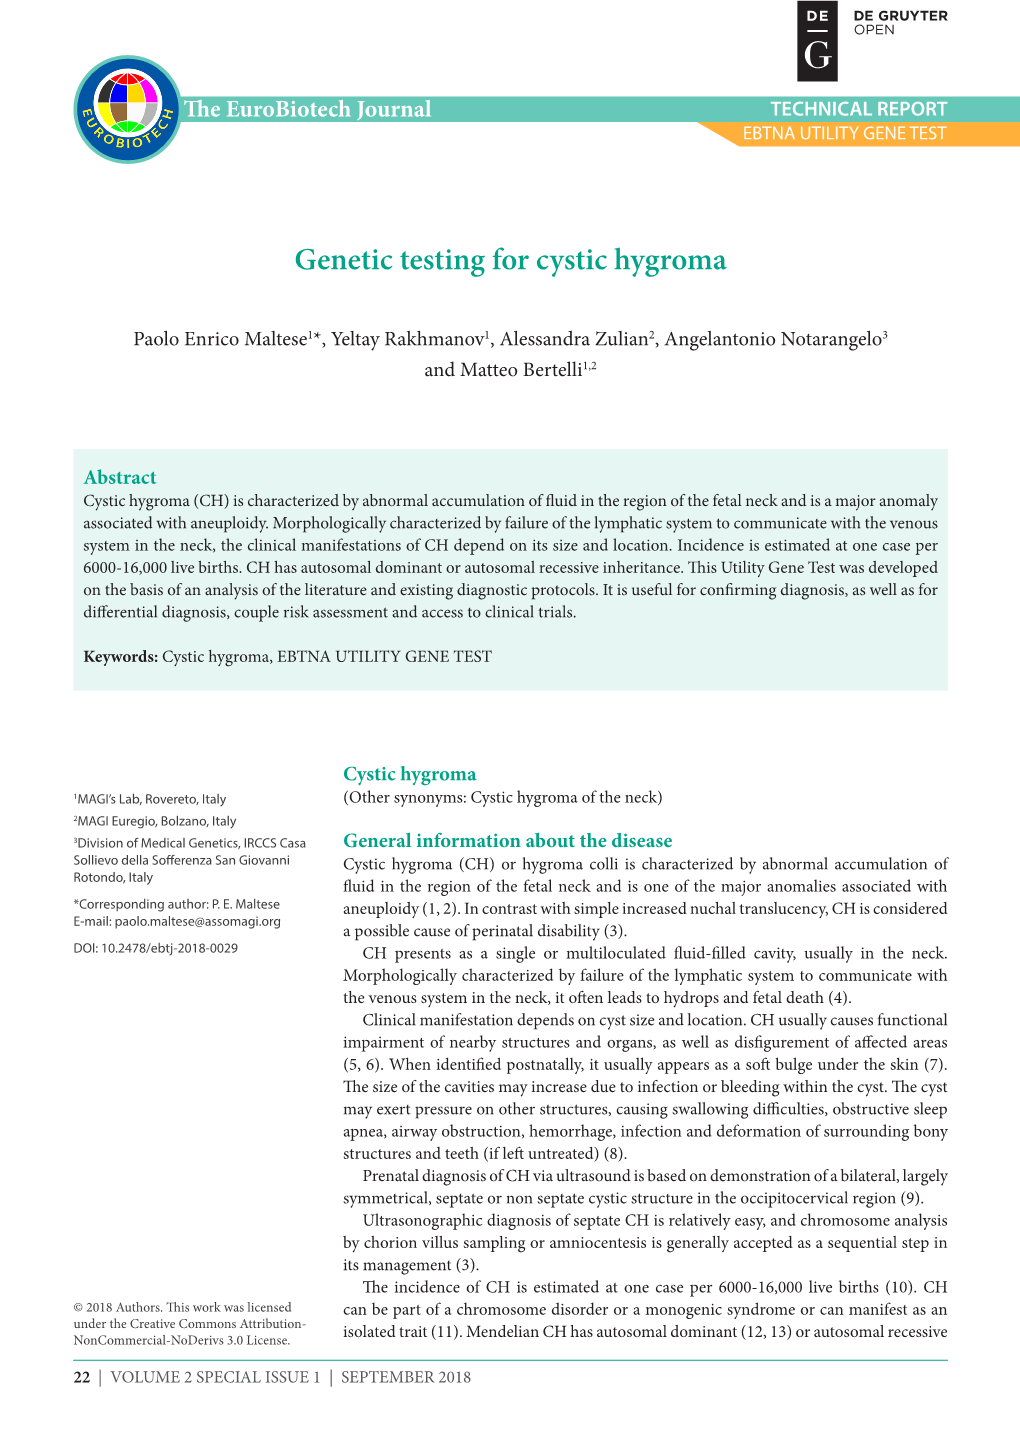 Genetic Testing for Cystic Hygroma